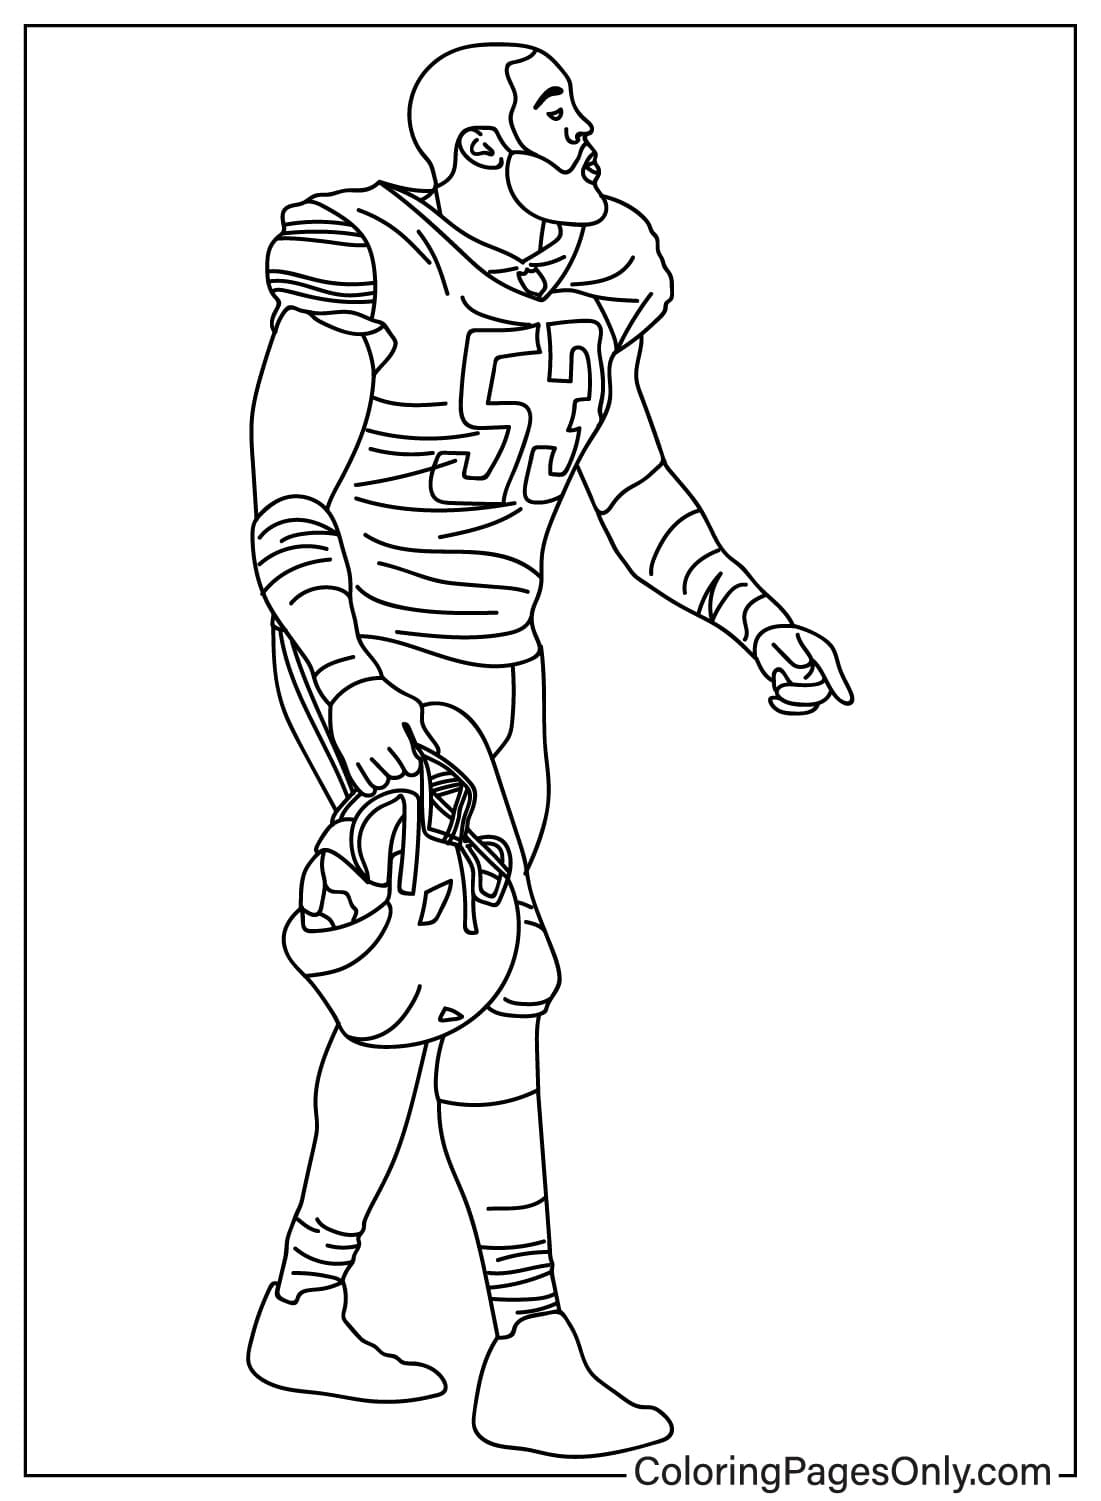 Charles Harris Coloring Page from Detroit Lions